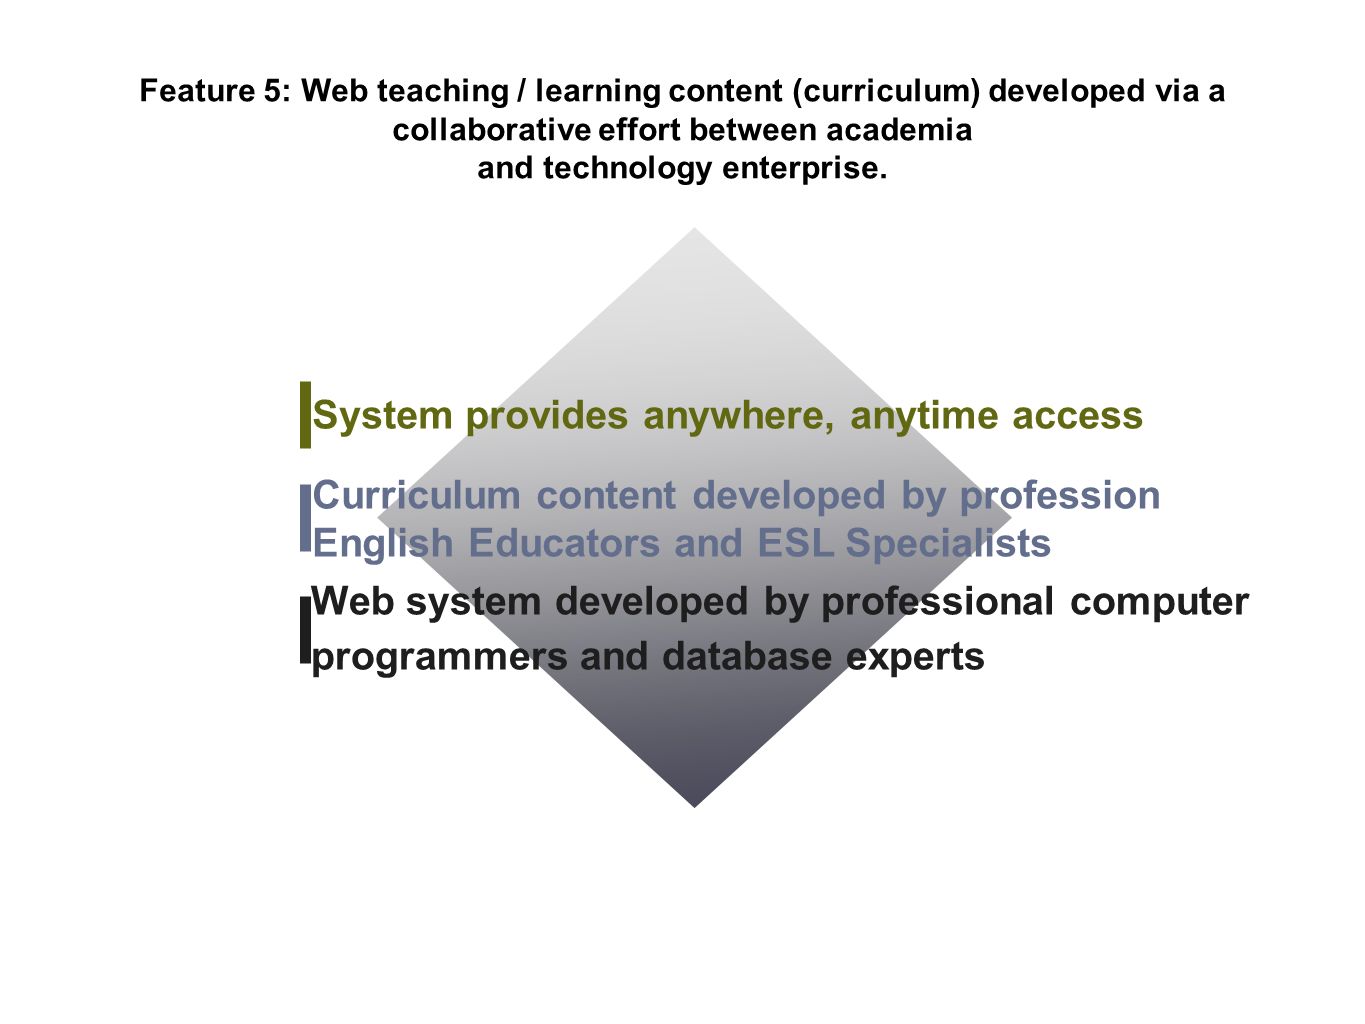 System provides anywhere, anytime access Curriculum content developed by profession English Educators and ESL Specialists Web system developed by professional computer programmers and database experts Feature 5: Web teaching / learning content (curriculum) developed via a collaborative effort between academia and technology enterprise.